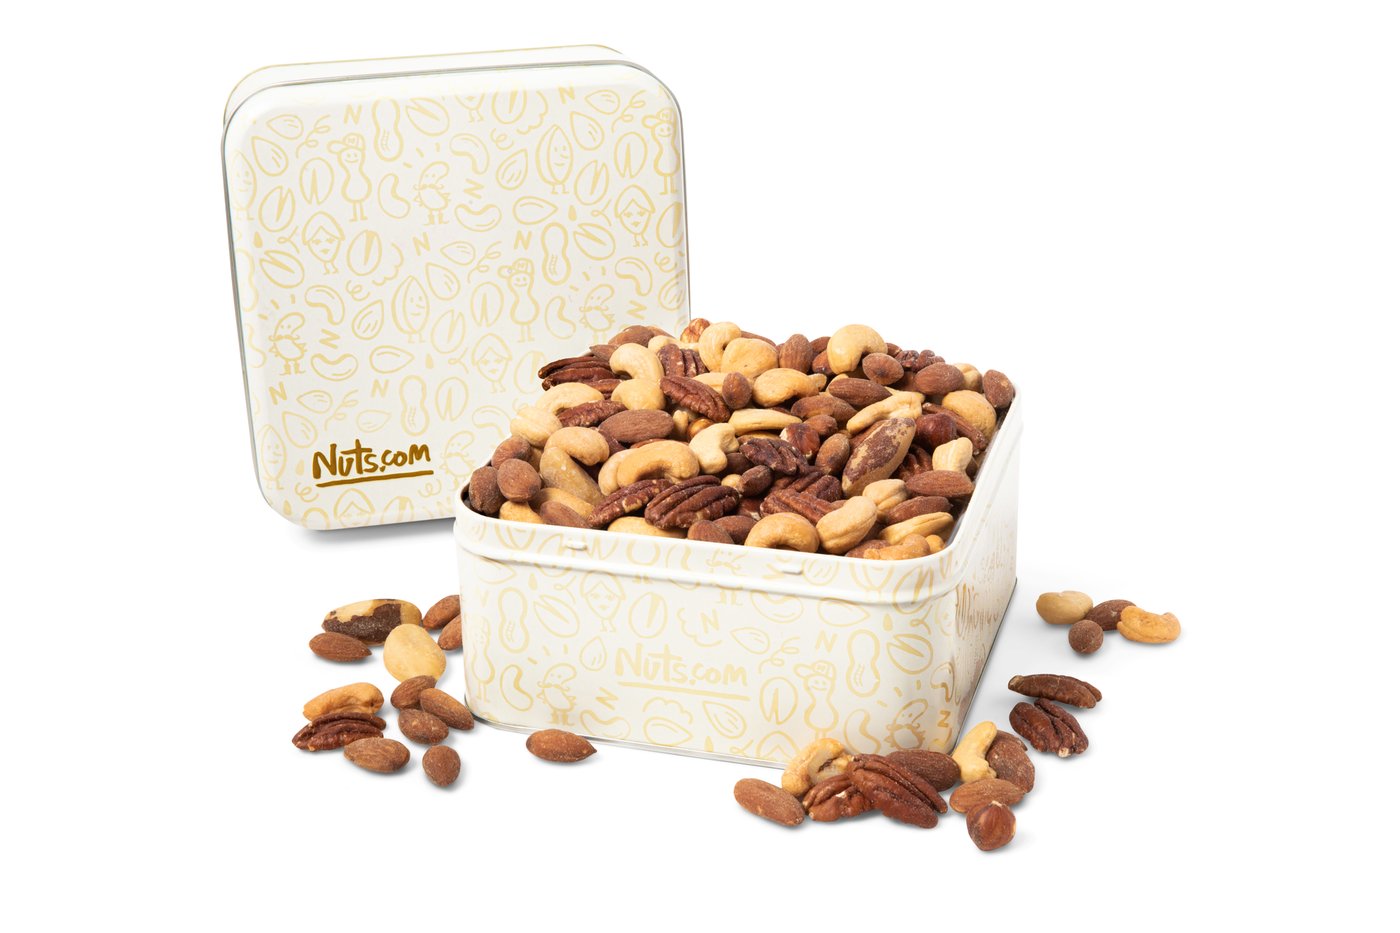 The World's Finest Mixed Nuts (Lightly Salted) image zoom